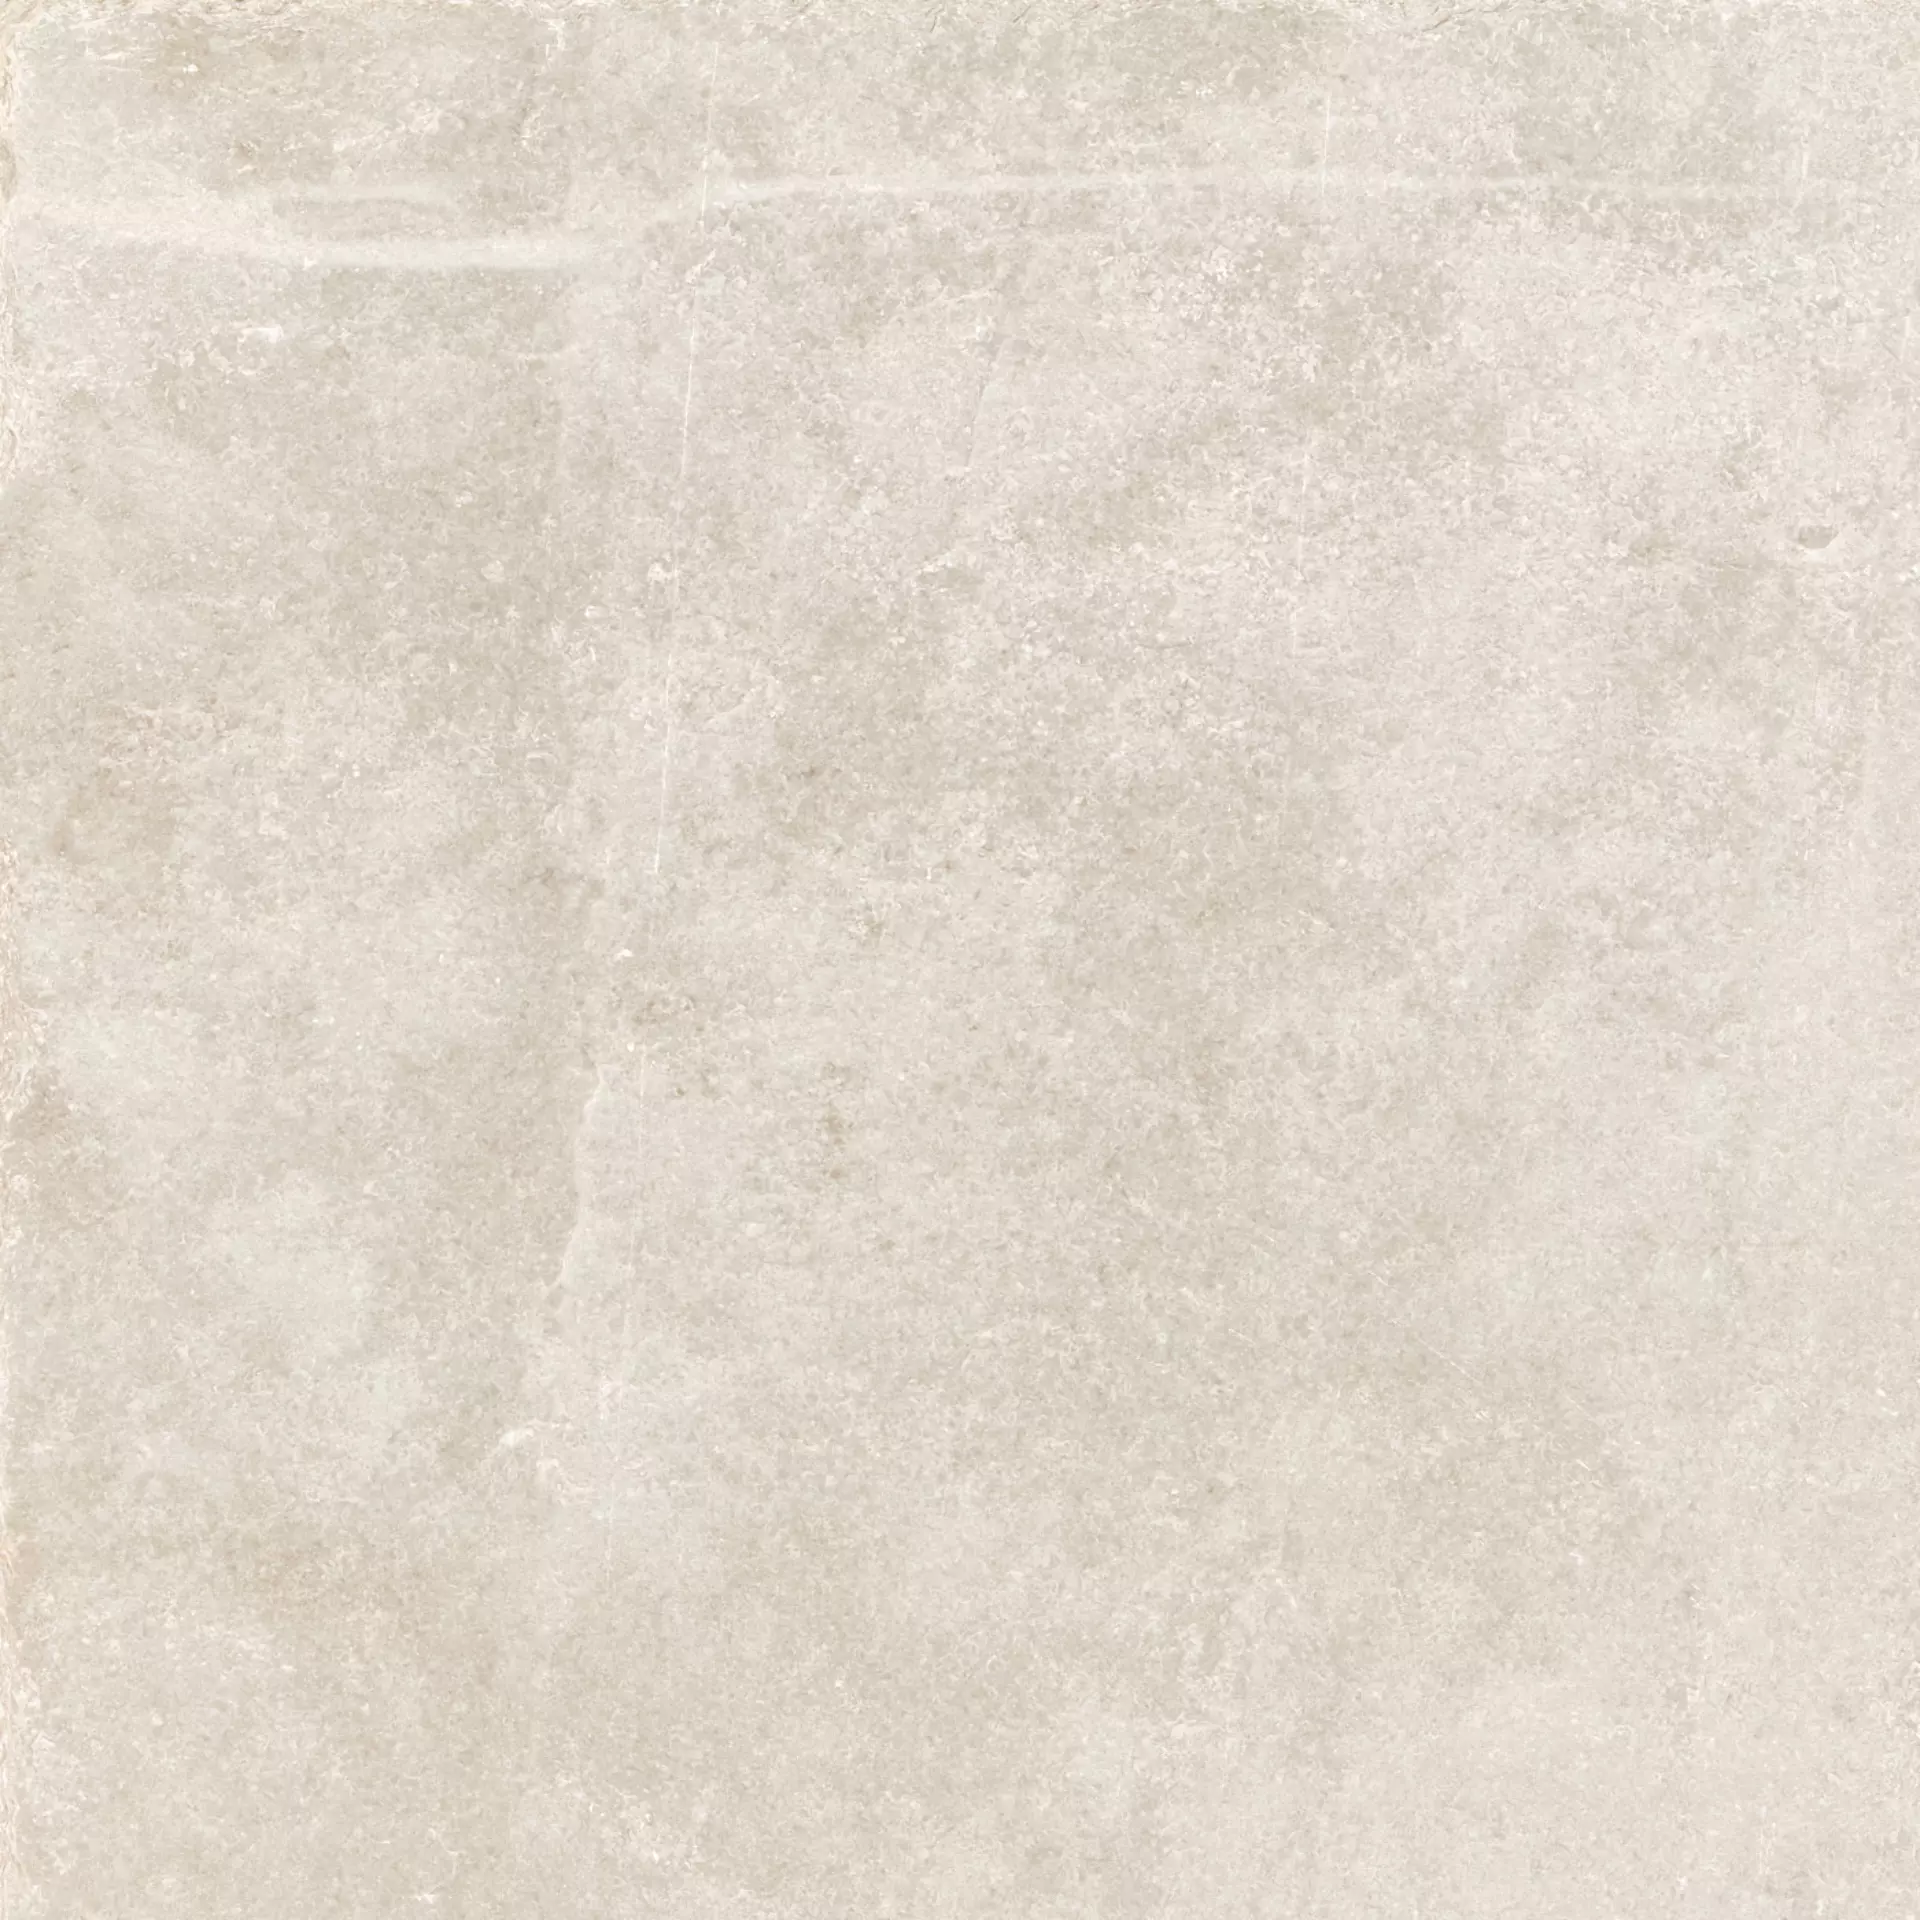 Provenza Groove Hot White Naturale E35S 60x60cm rectified 9,5mm